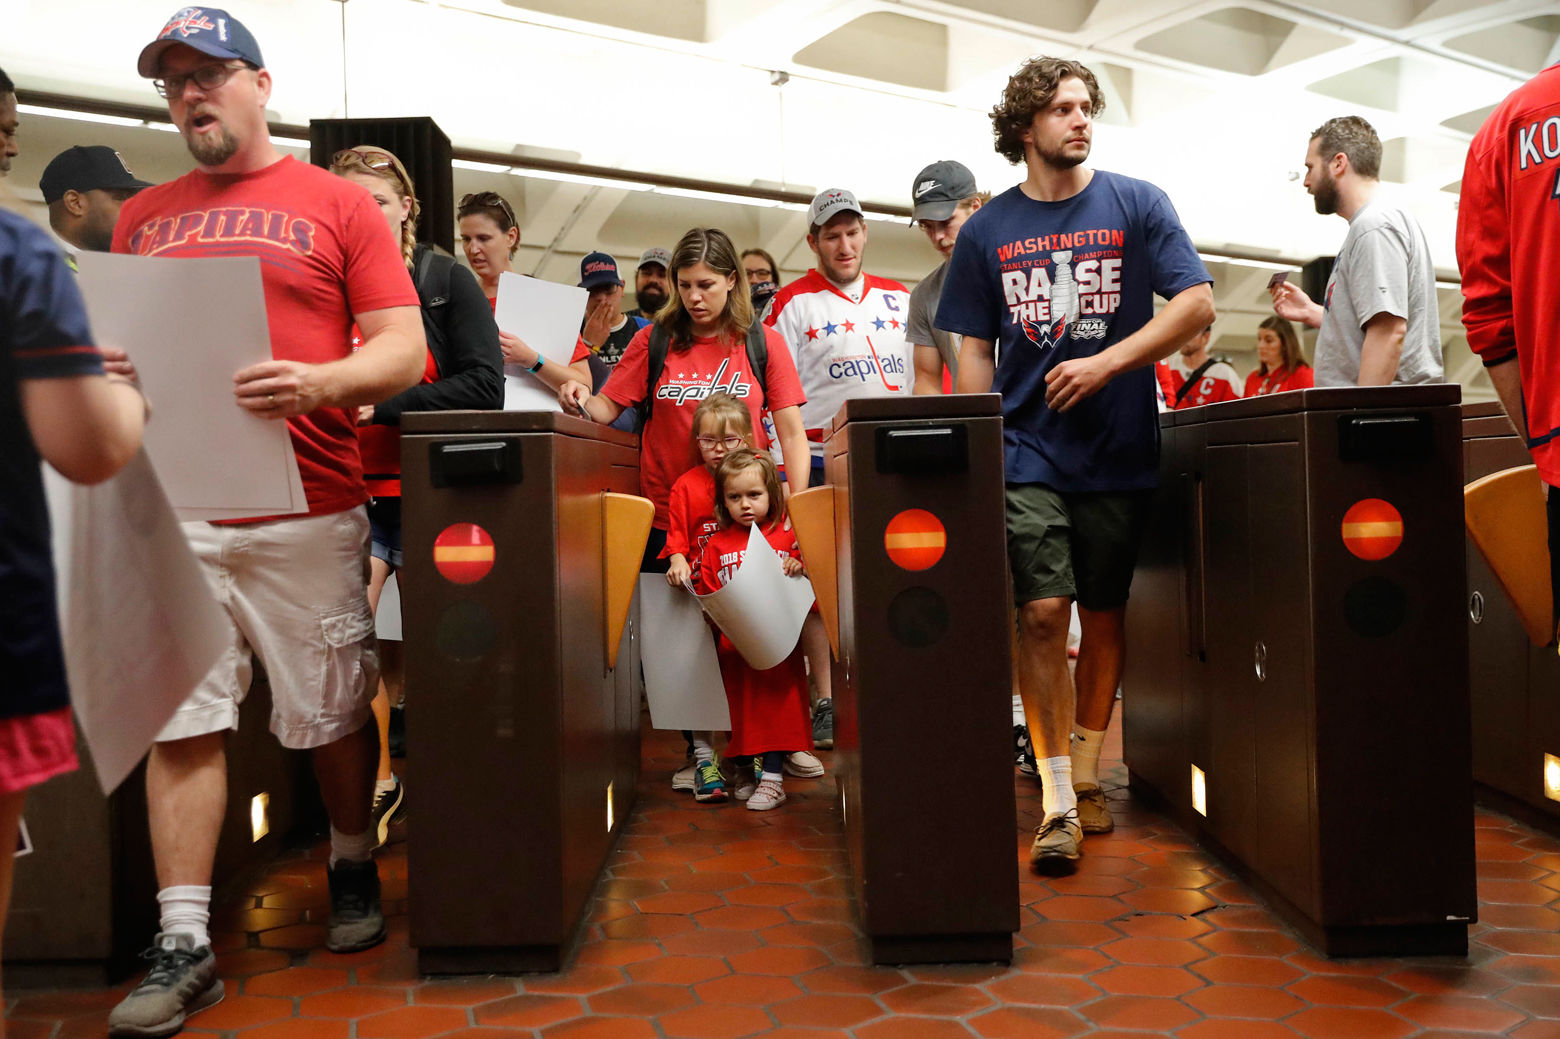 People use the turnstiles as they exit the National Archives Metro Subway station and head towards the Washington Capitals Stanley Cup victory parade on the National Mall in Washington, Tuesday, June 12, 2018. (AP Photo/Pablo Martinez Monsivais)